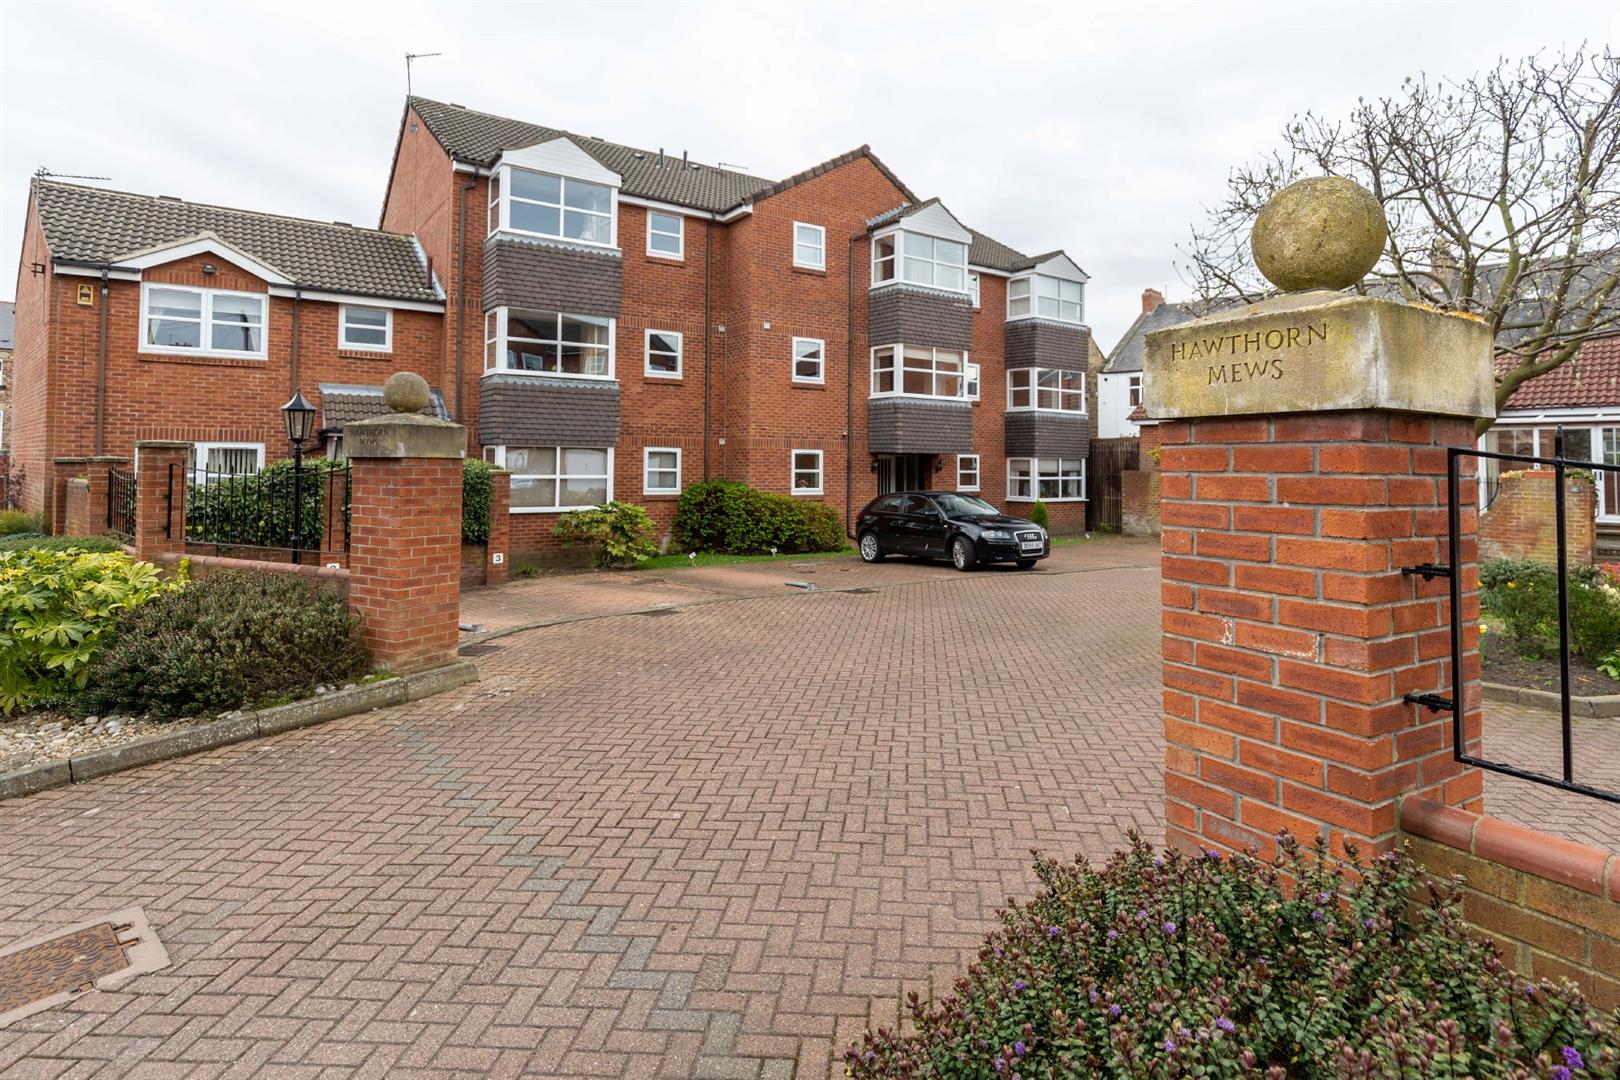 2 bed apartment to rent in Hawthorn Mews, Gosforth, NE3 